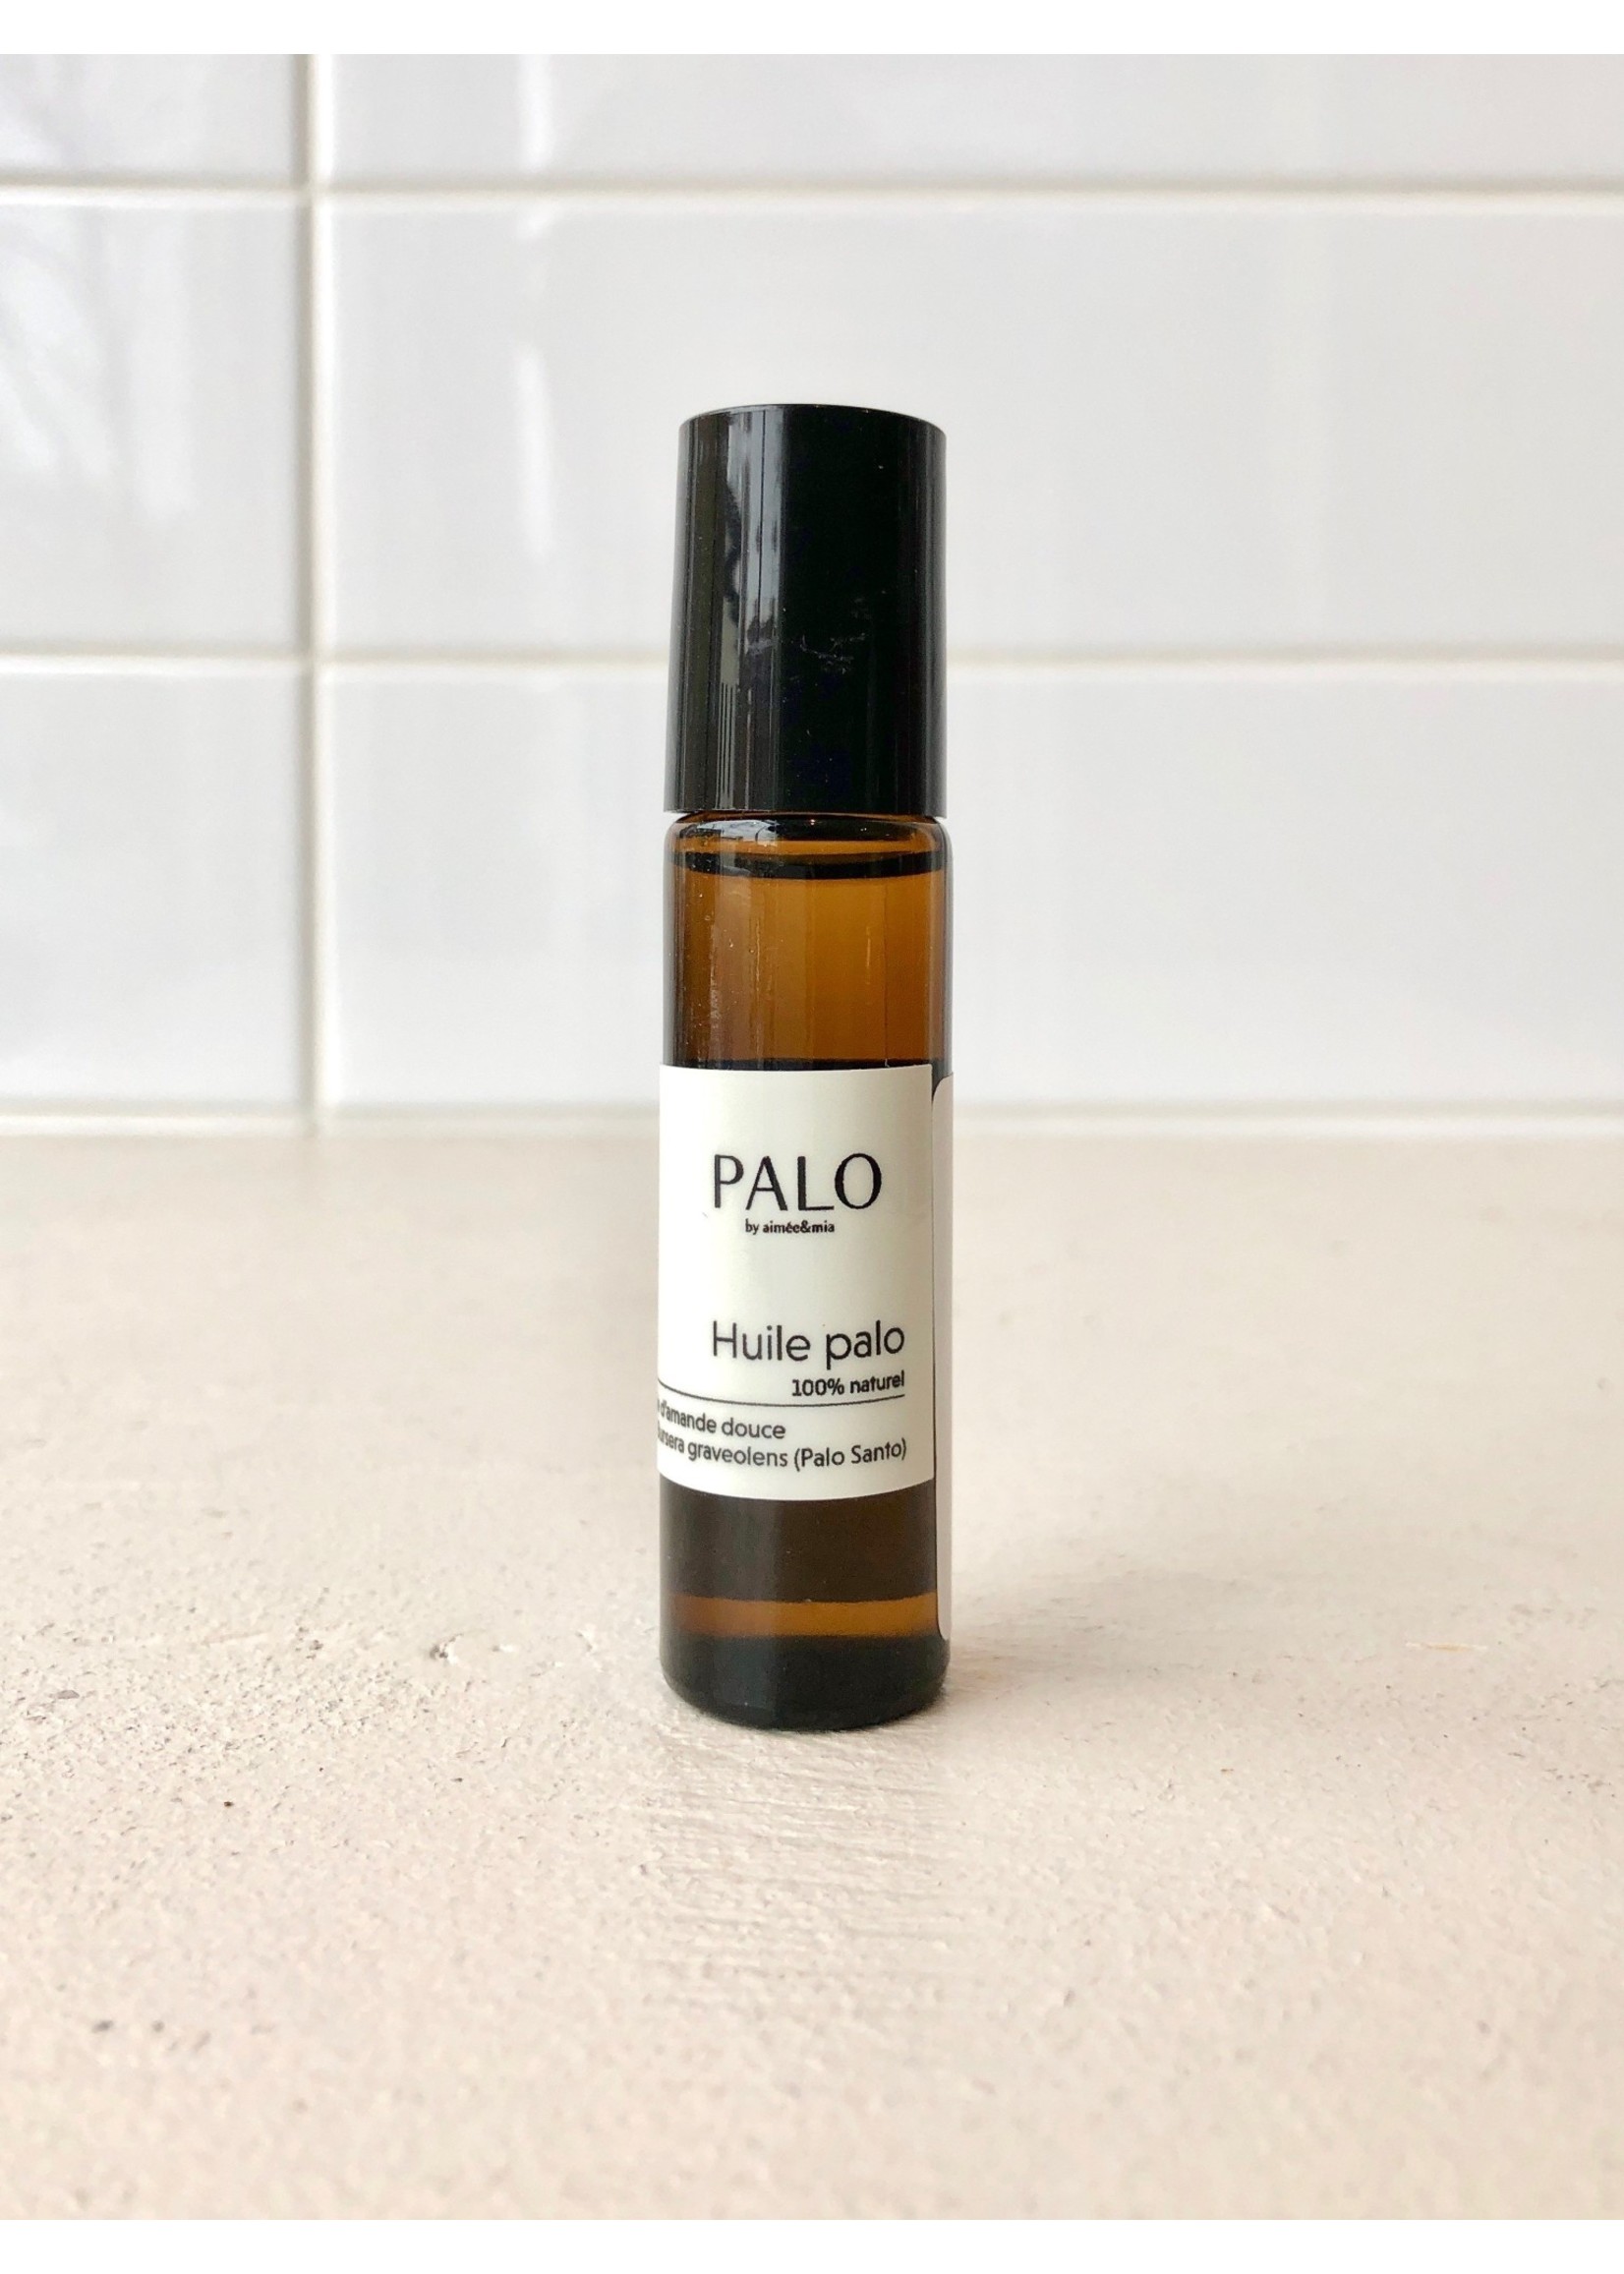 Palo by Aimee & Mia Oil for Anxiety and Insomnia